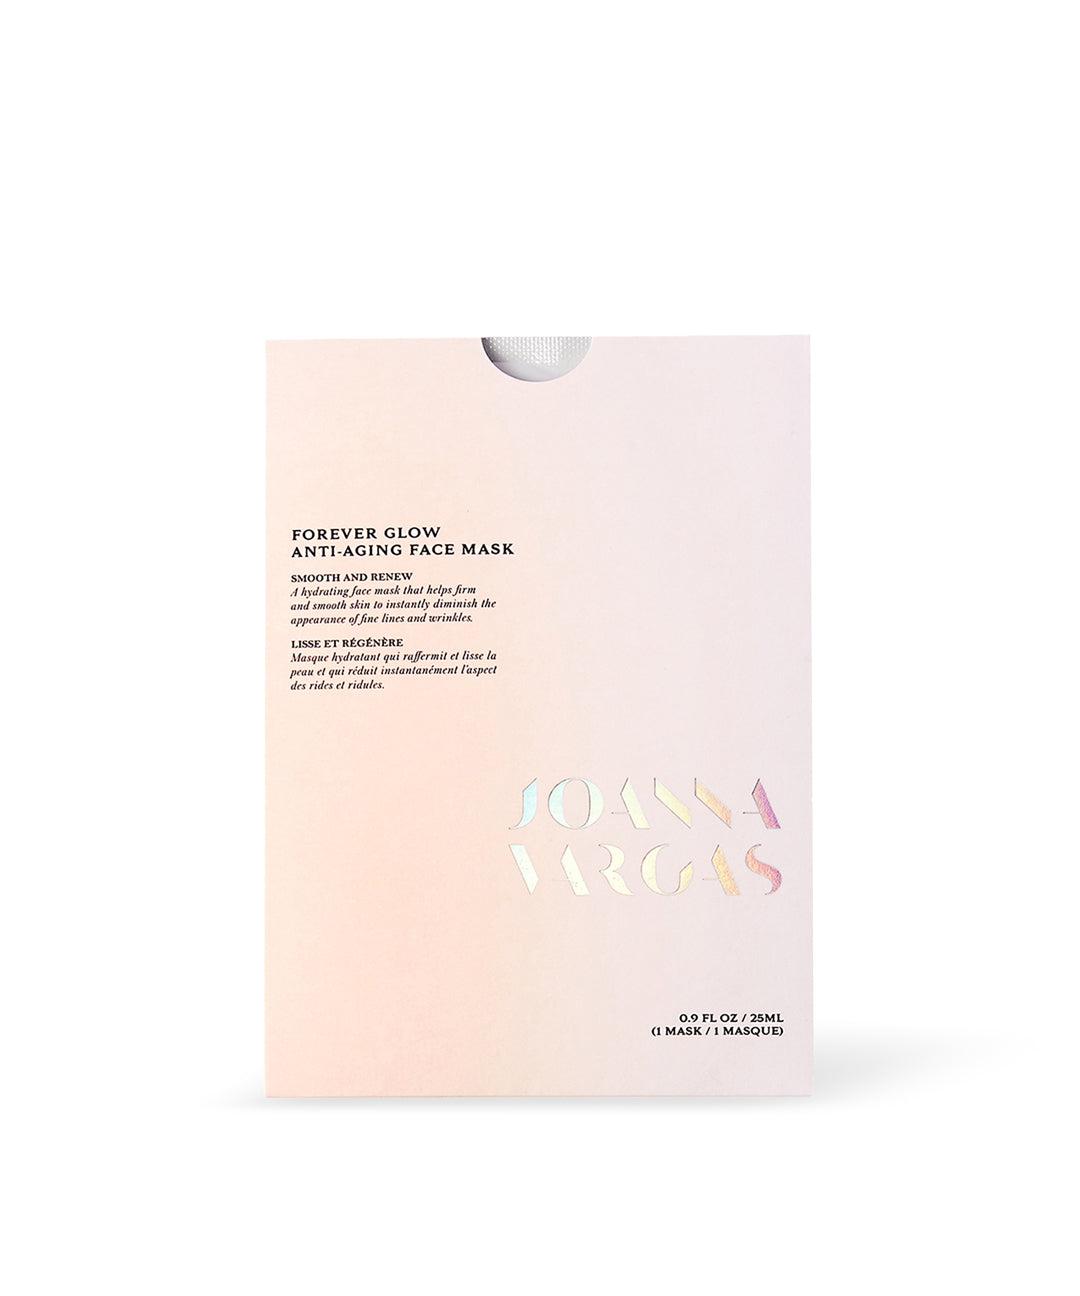 FOREVER GLOW ANTI-AGING FACE MASK SINGLE